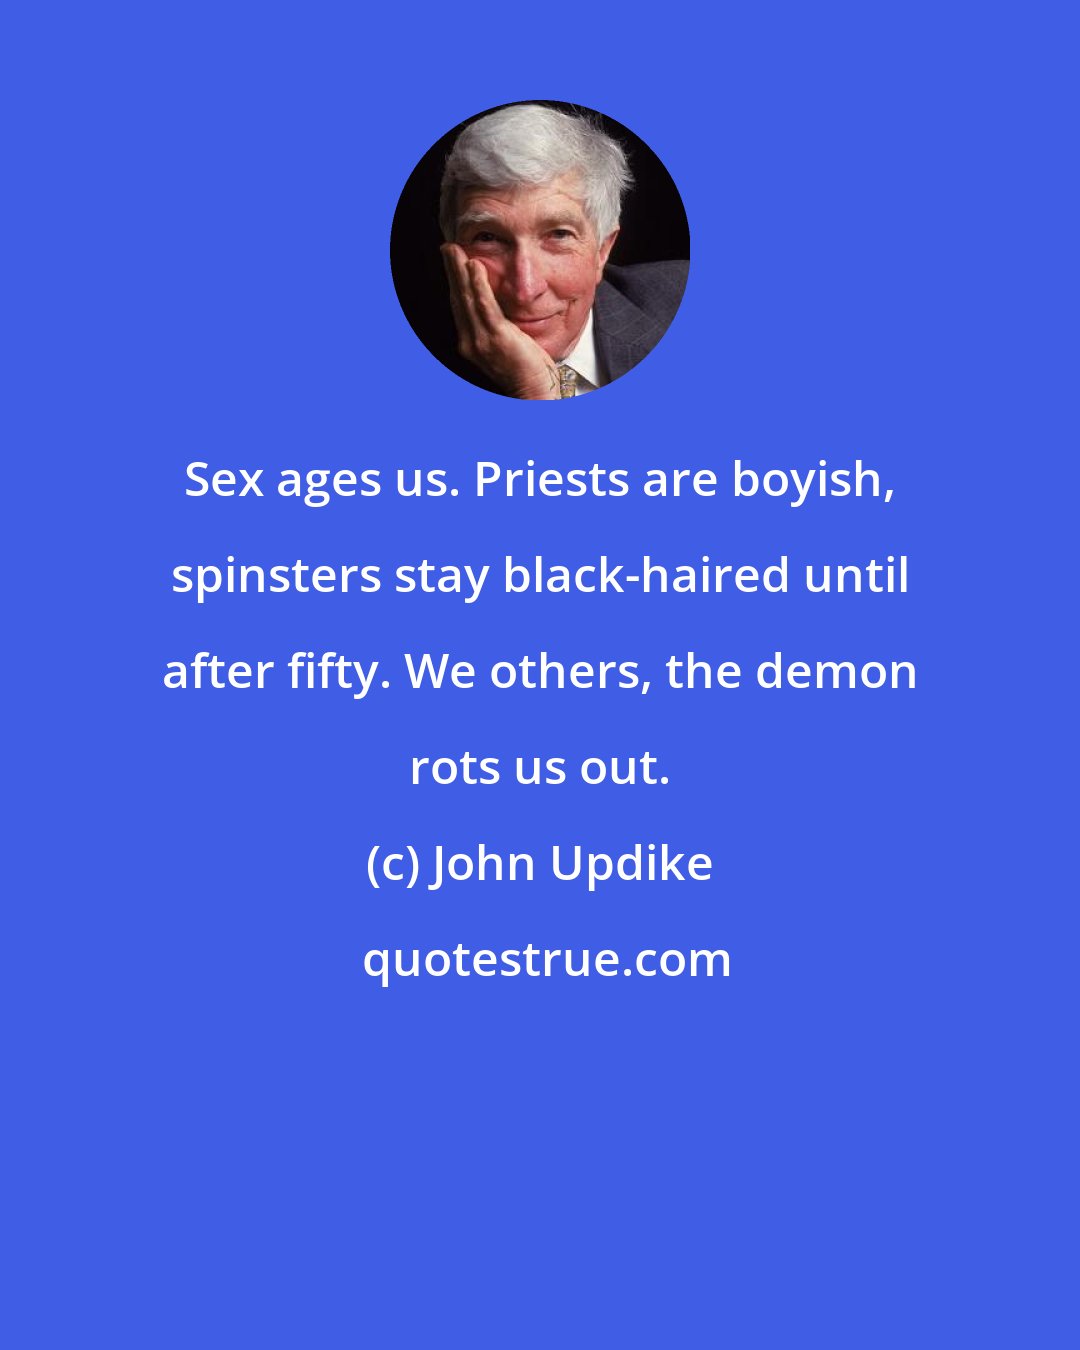 John Updike: Sex ages us. Priests are boyish, spinsters stay black-haired until after fifty. We others, the demon rots us out.